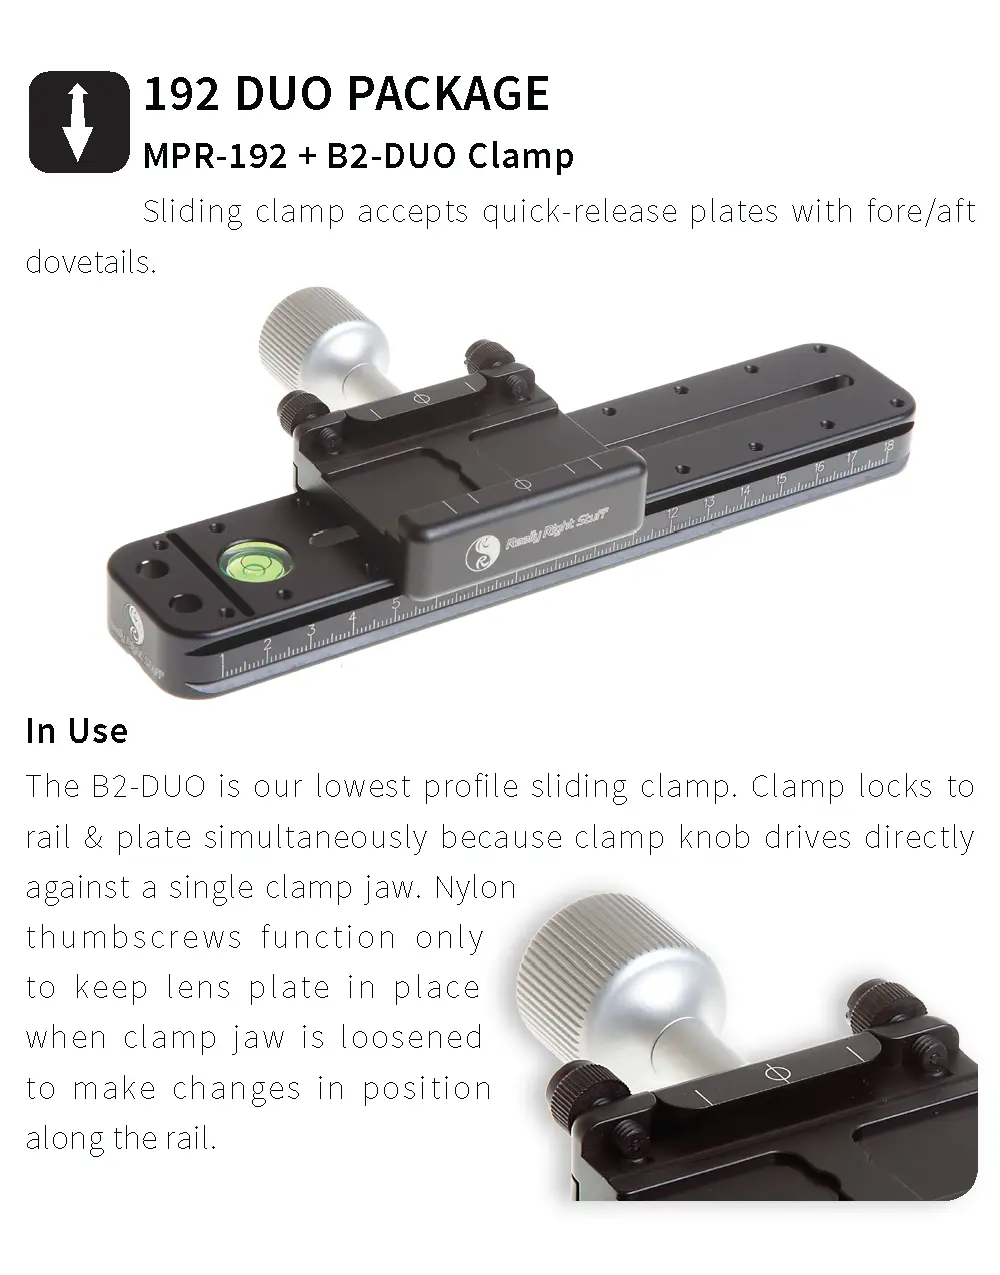 DUO rail and clamp package